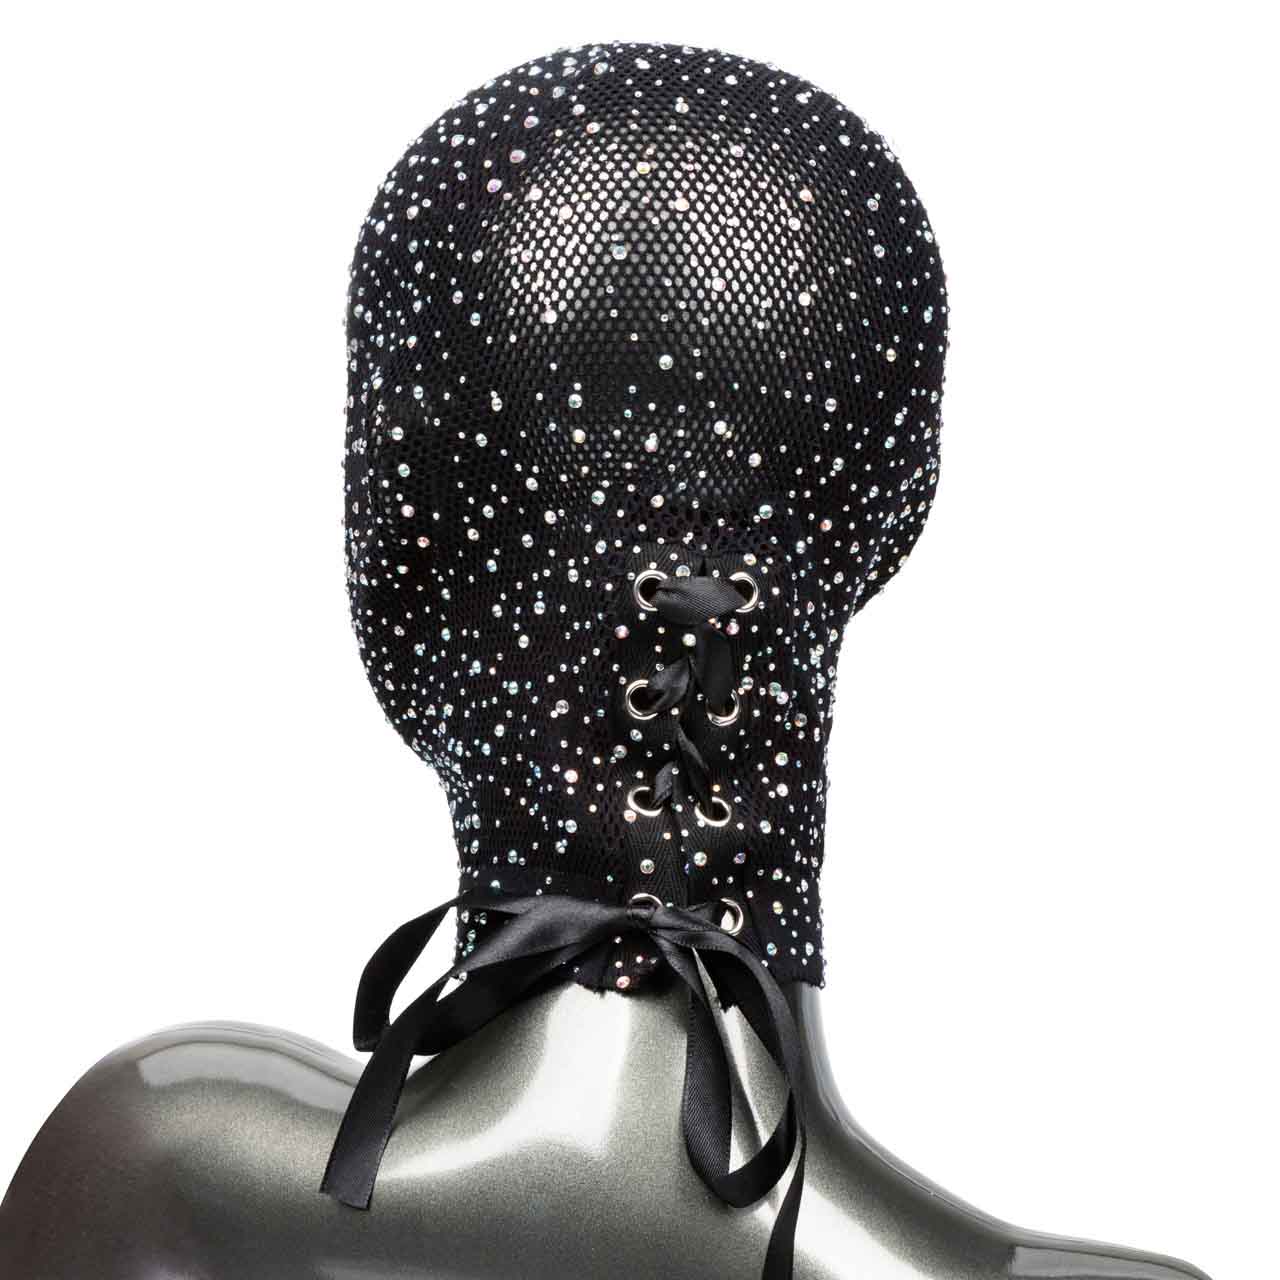 The net sparkle hood displayed on a mannequin head, rear view.